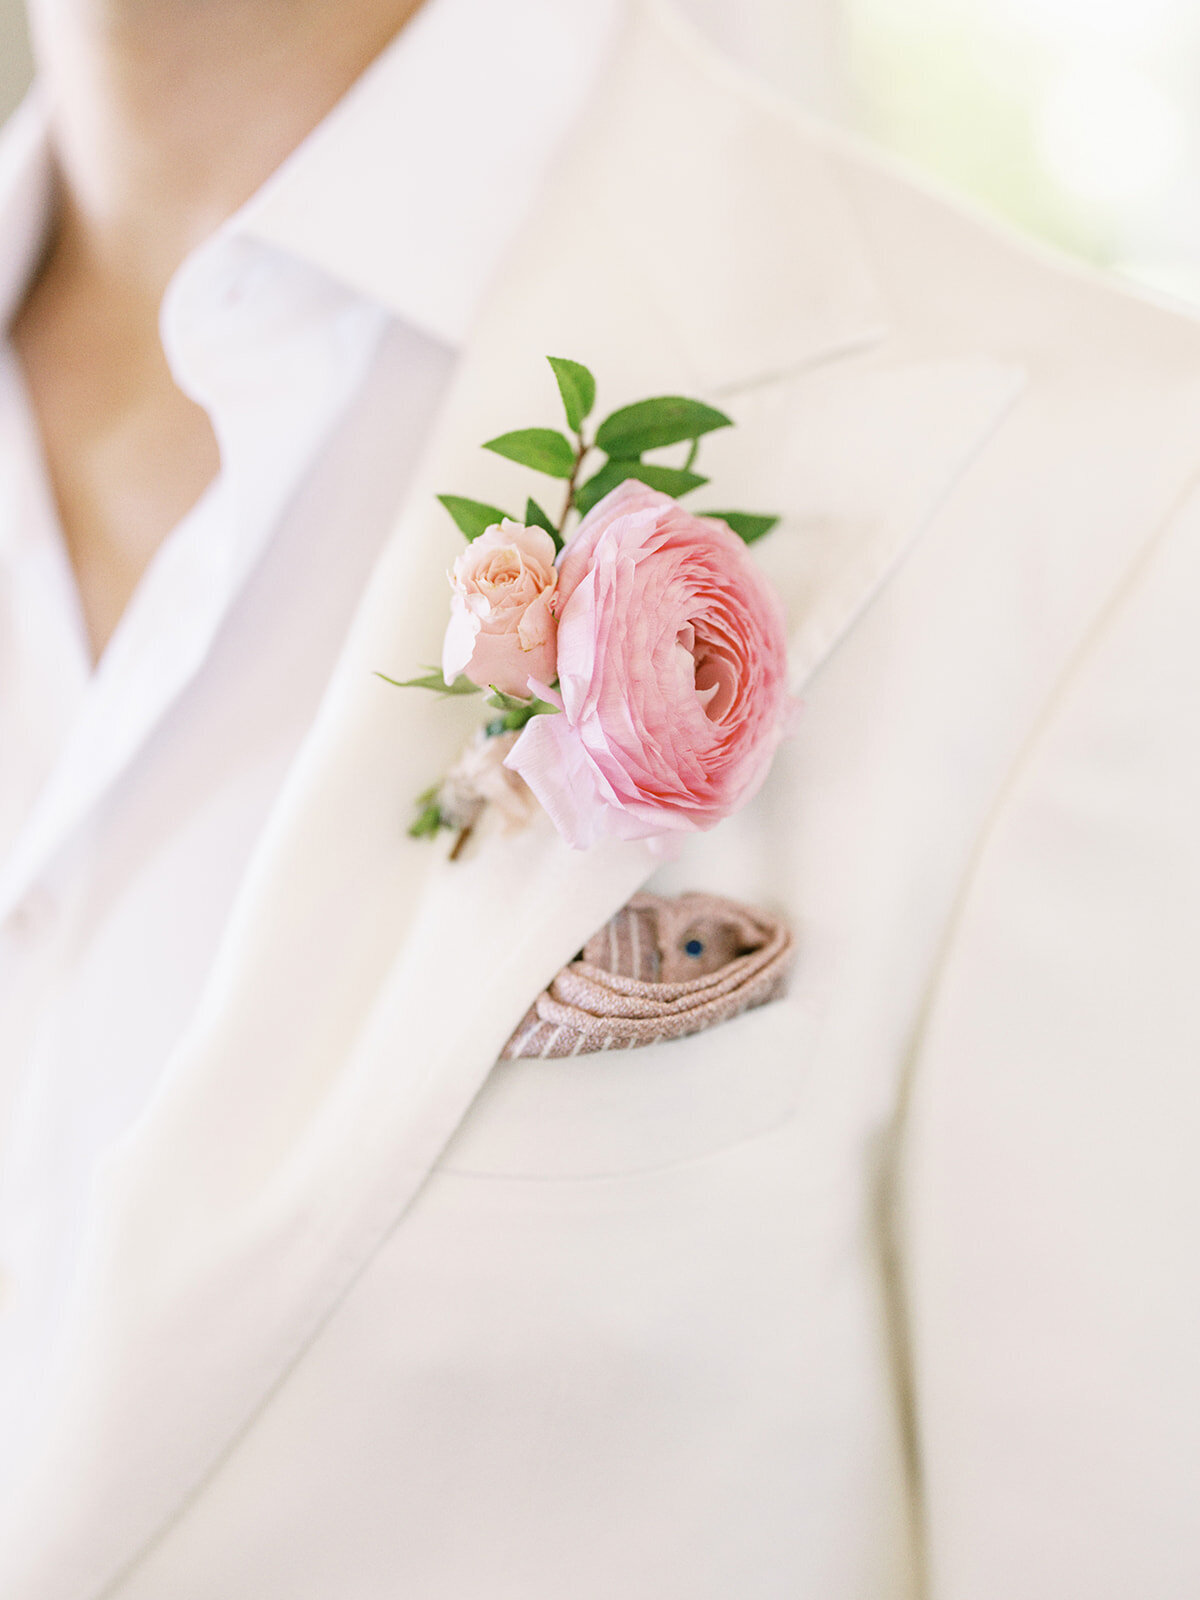 Dainty pink ranunculus boutonniere for spring beach wedding at private estate. Destination wedding in Exuma, Bahamas. Destination floral design by Rosemary & Finch Floral Design.